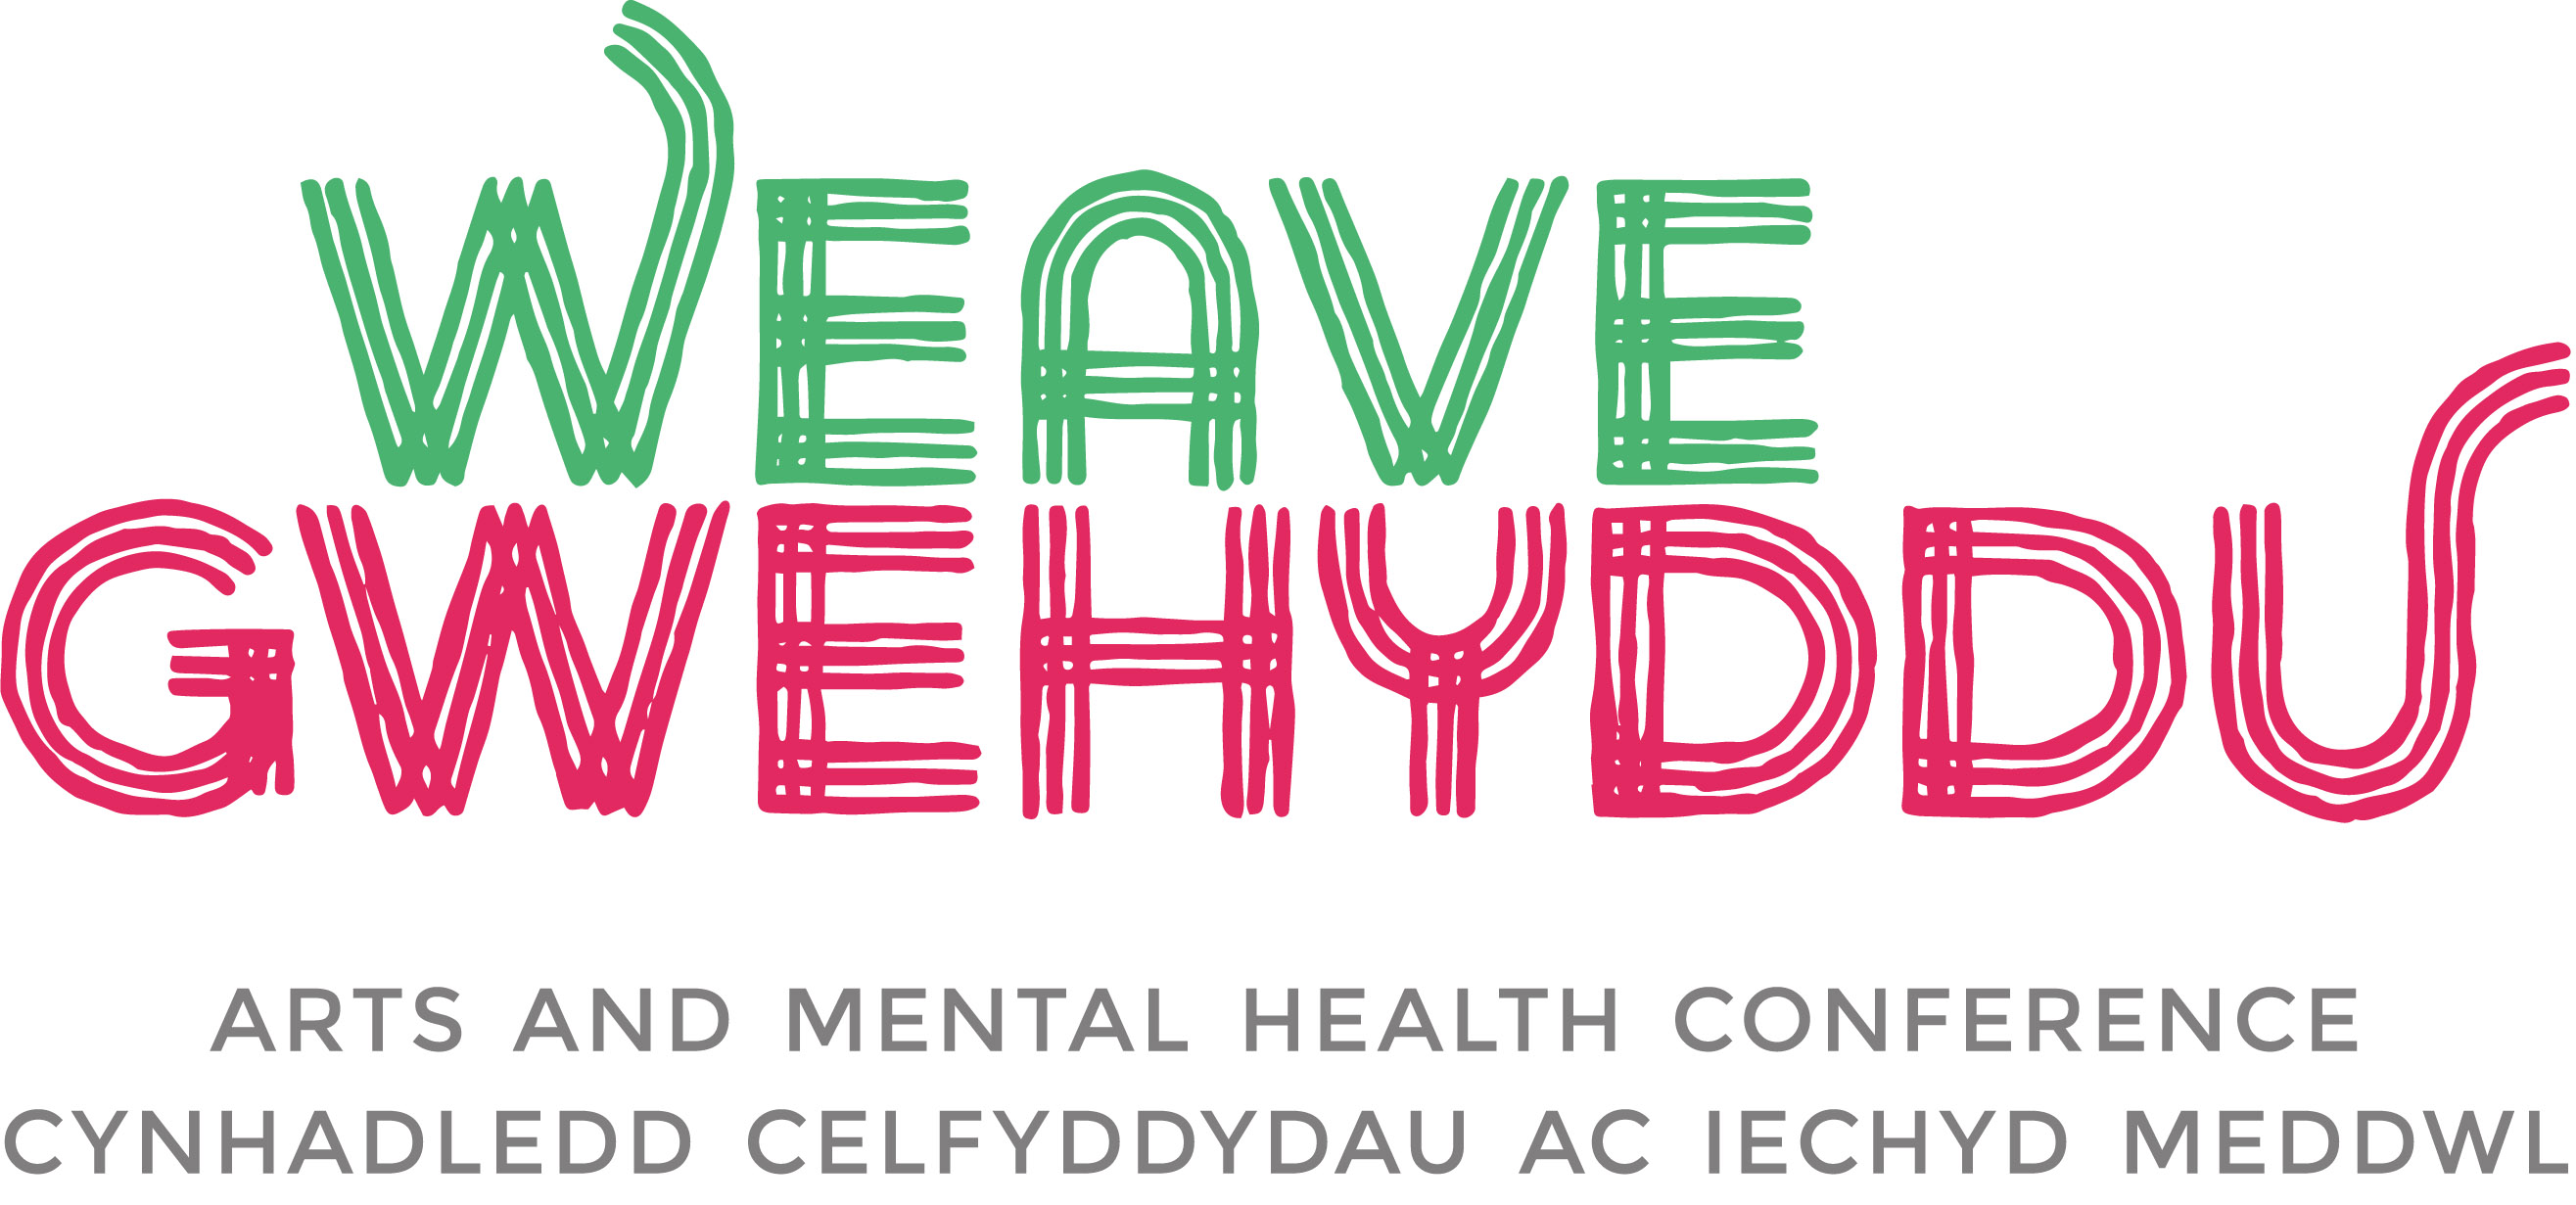 Weave arts and mental health conference